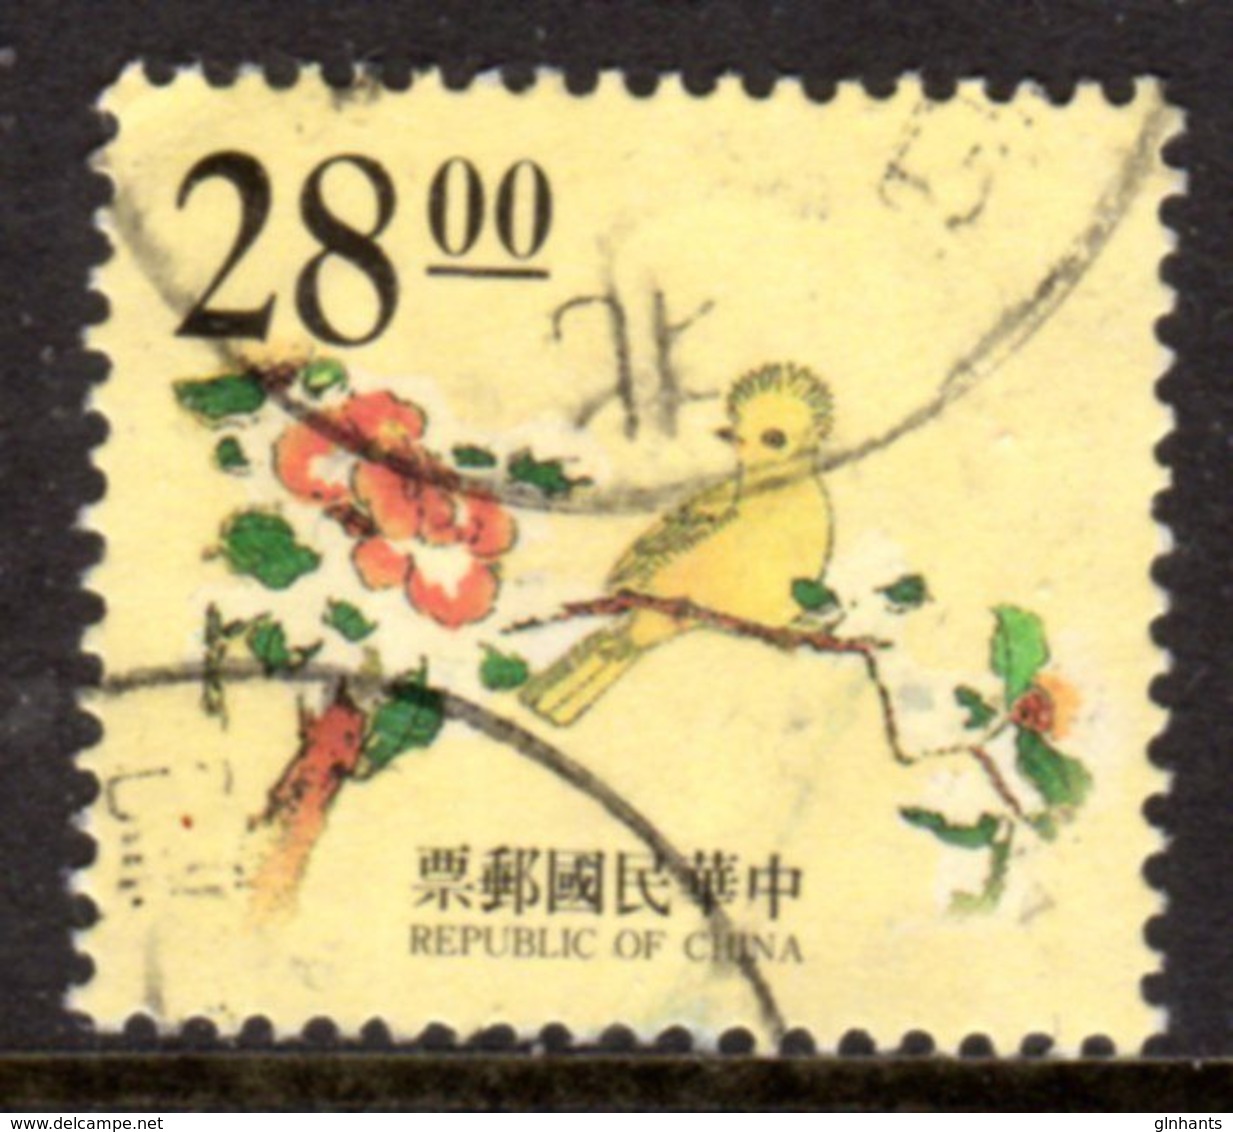 TAIWAN ROC - 1995 ENGRAVINGS YELLOW BIRDS $28 STAMP FINE USED SG 2267 - Used Stamps